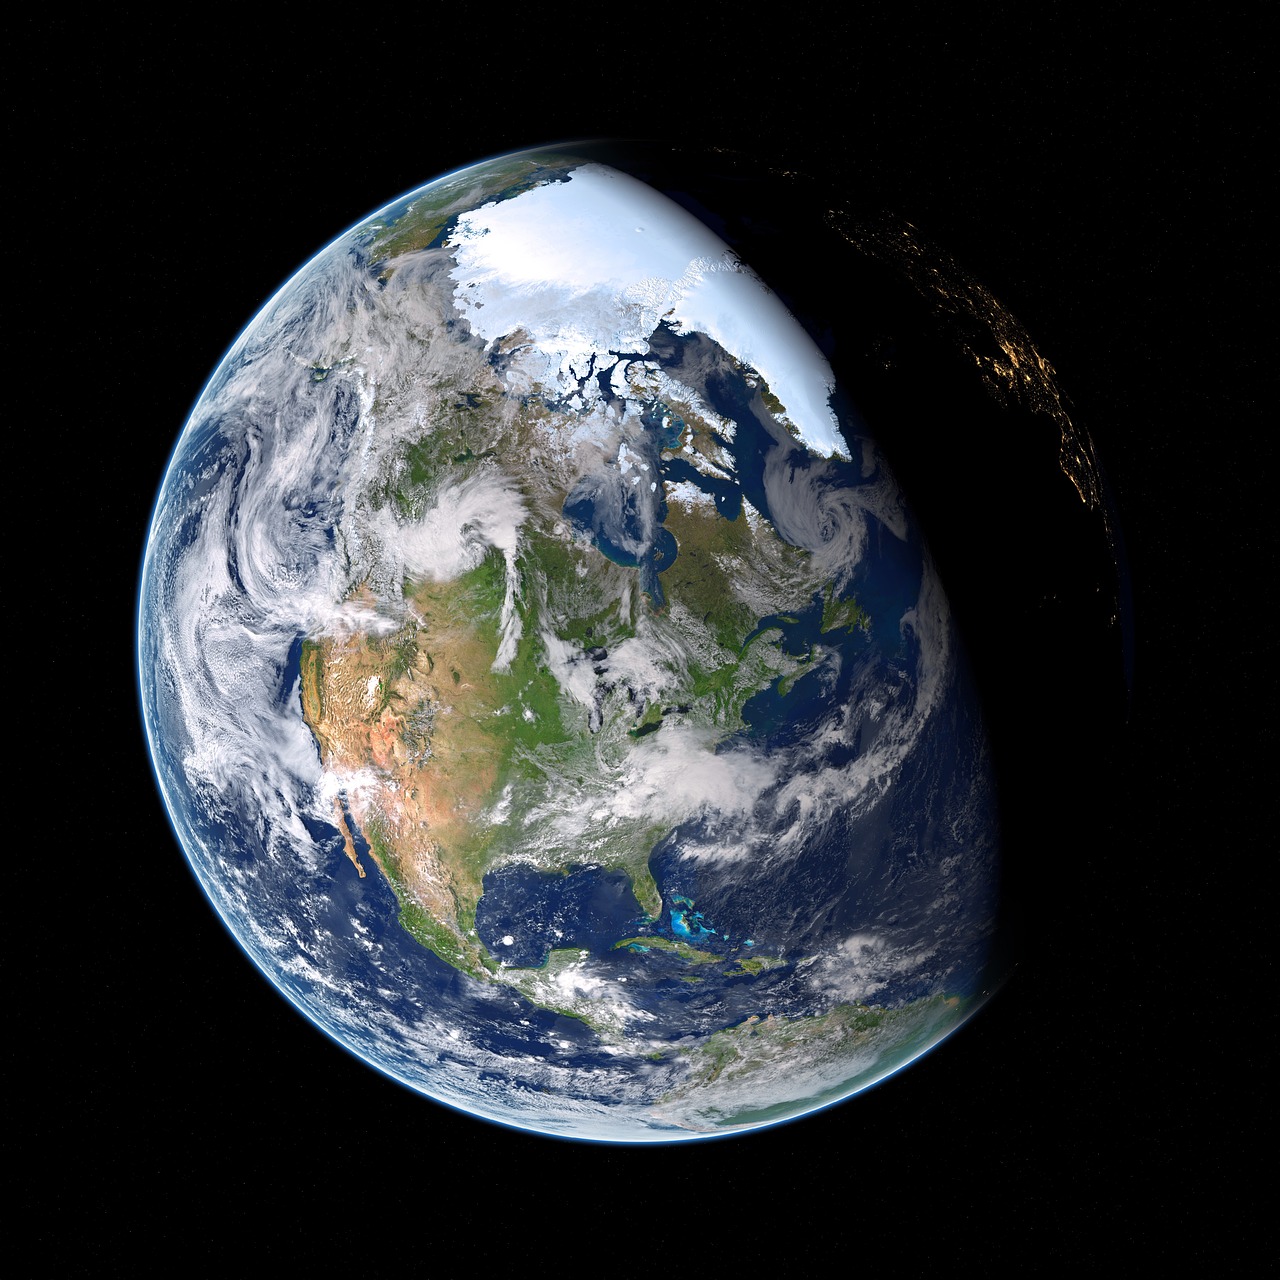 A photograph of the Earth from space.